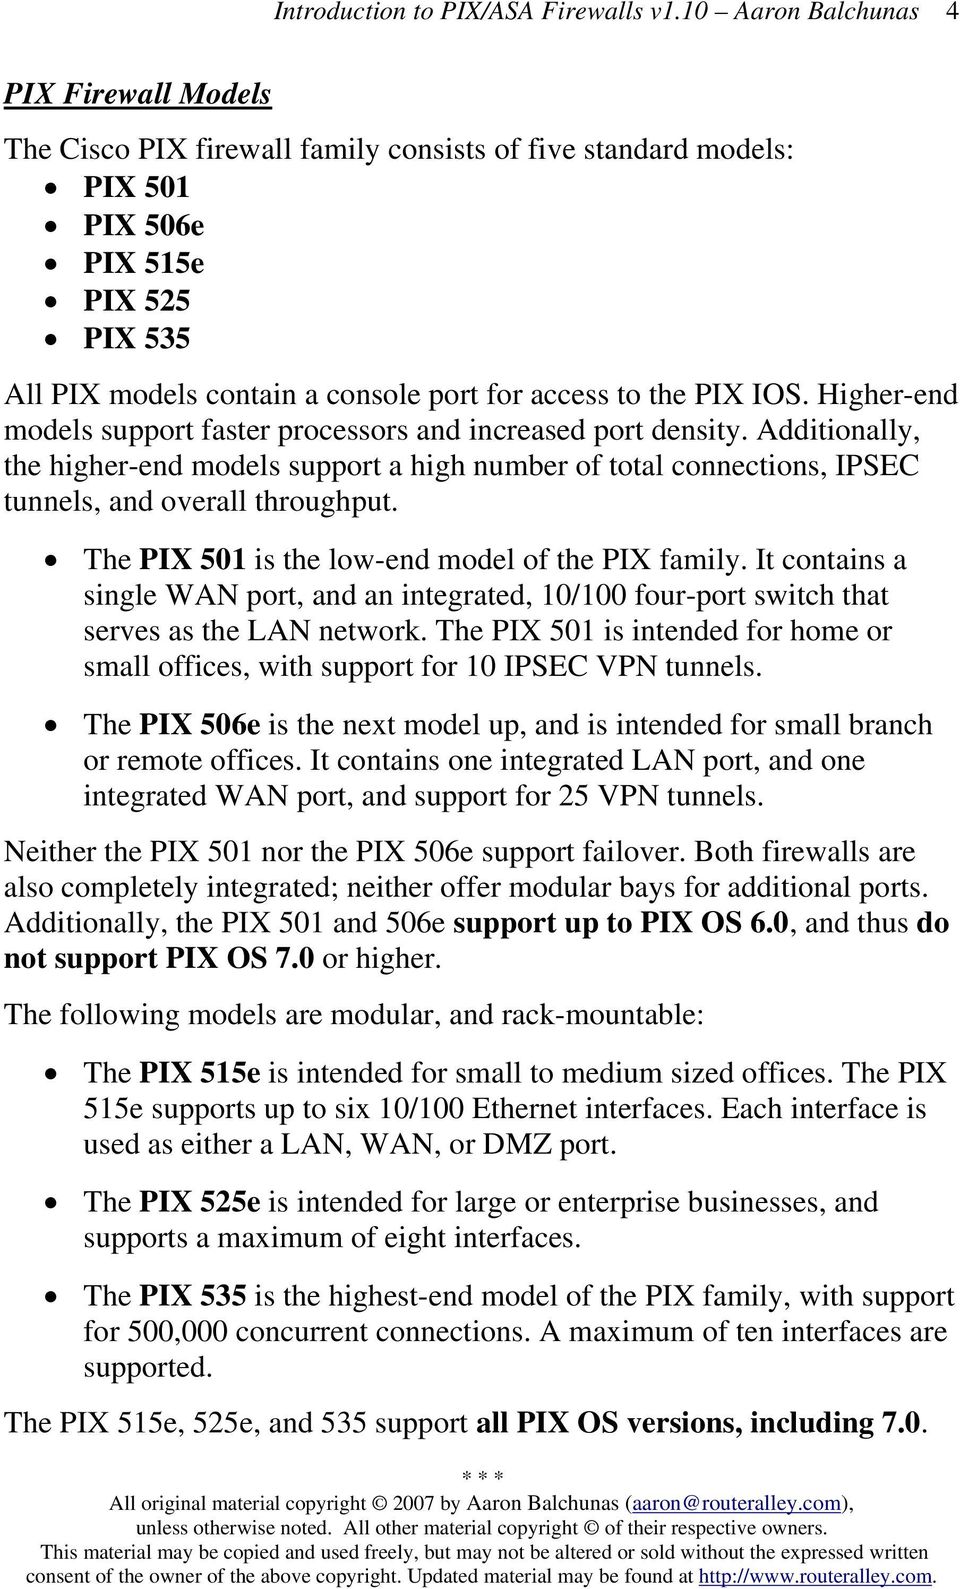 The PIX 501 is the low-end model of the PIX family. It contains a single WAN port, and an integrated, 10/100 four-port switch that serves as the LAN network.